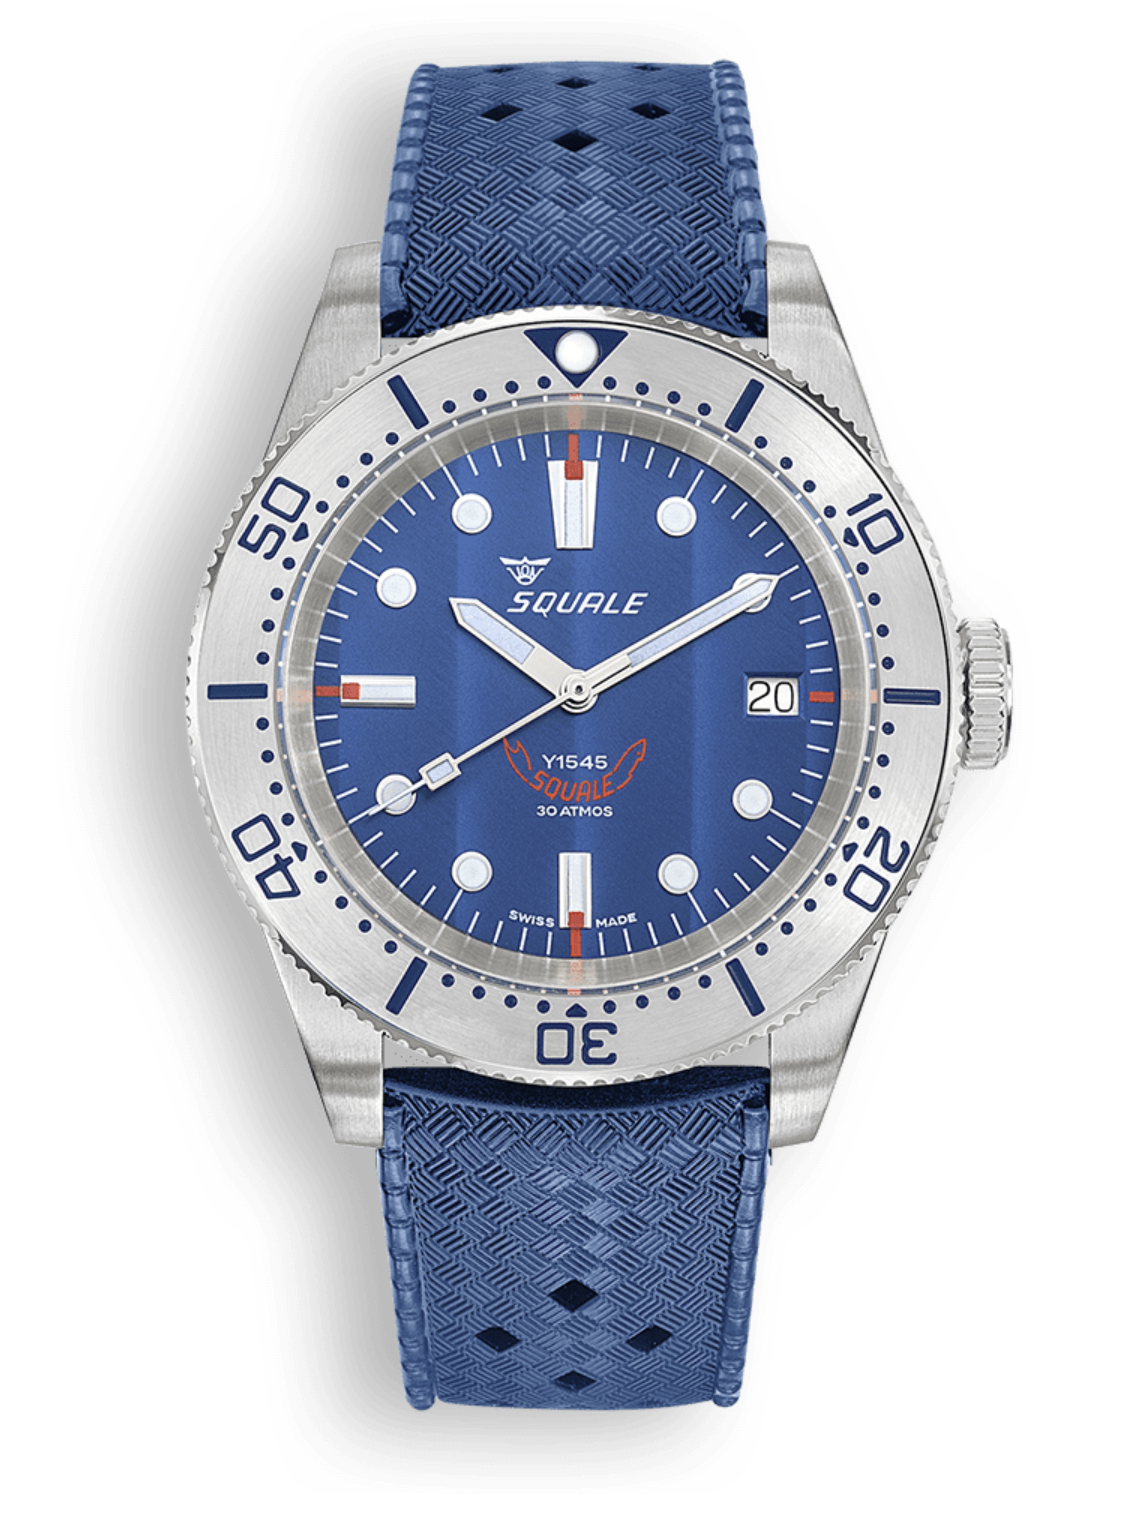 SQUALE 1545 STEEL BLUE RUBBER